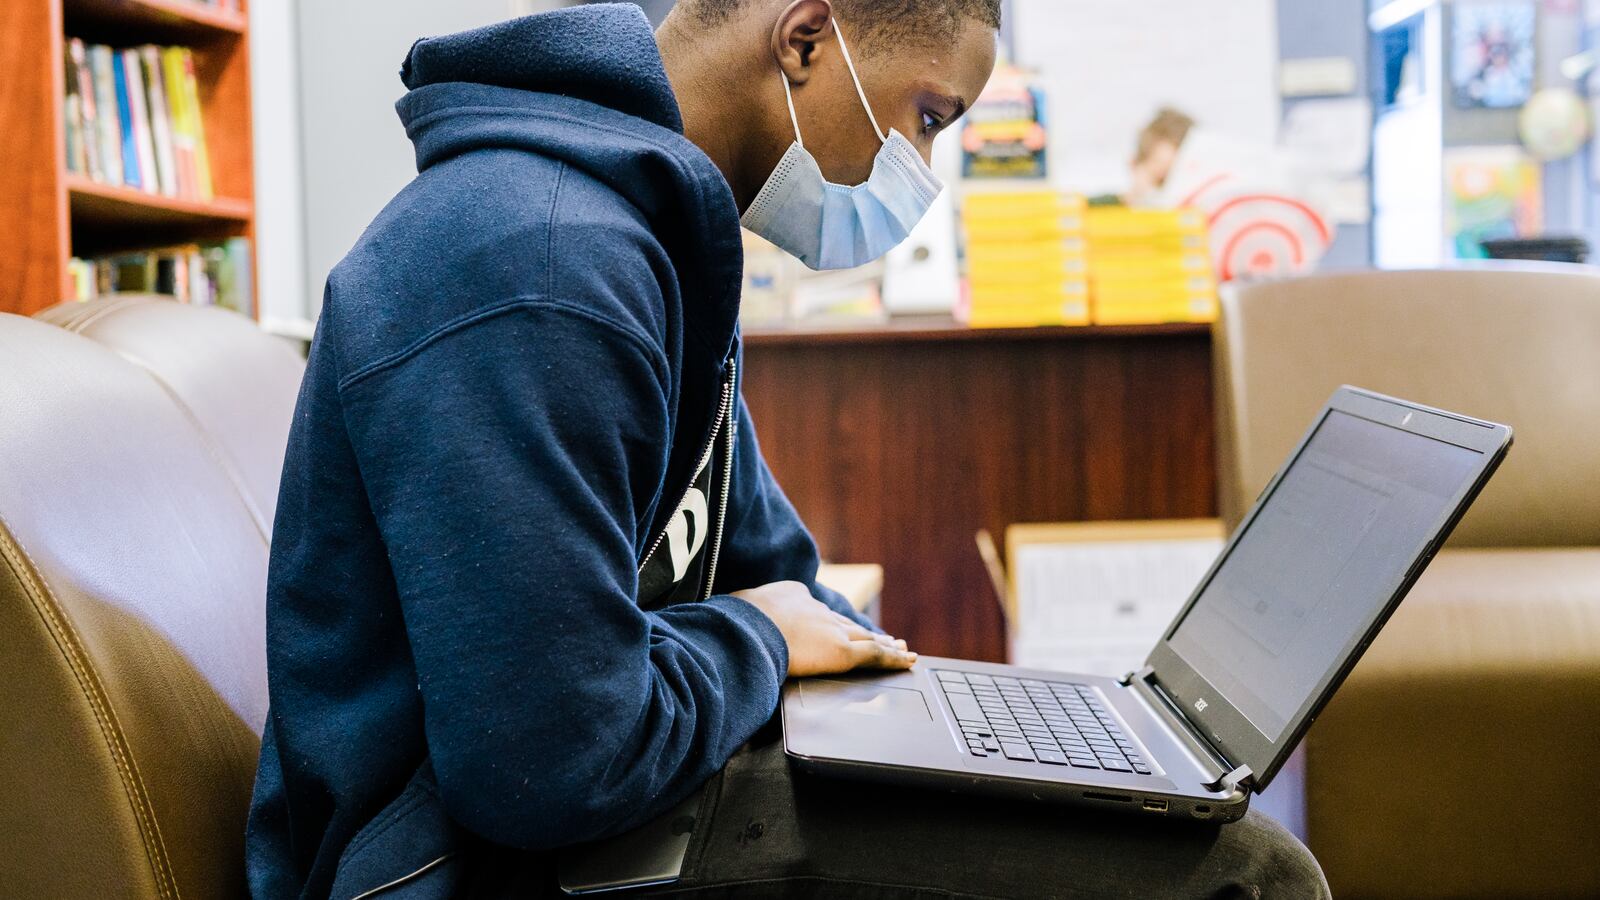 A teenager male in a blue sweatshirt is looking at a computer in a classroom. He is wearing a mask.